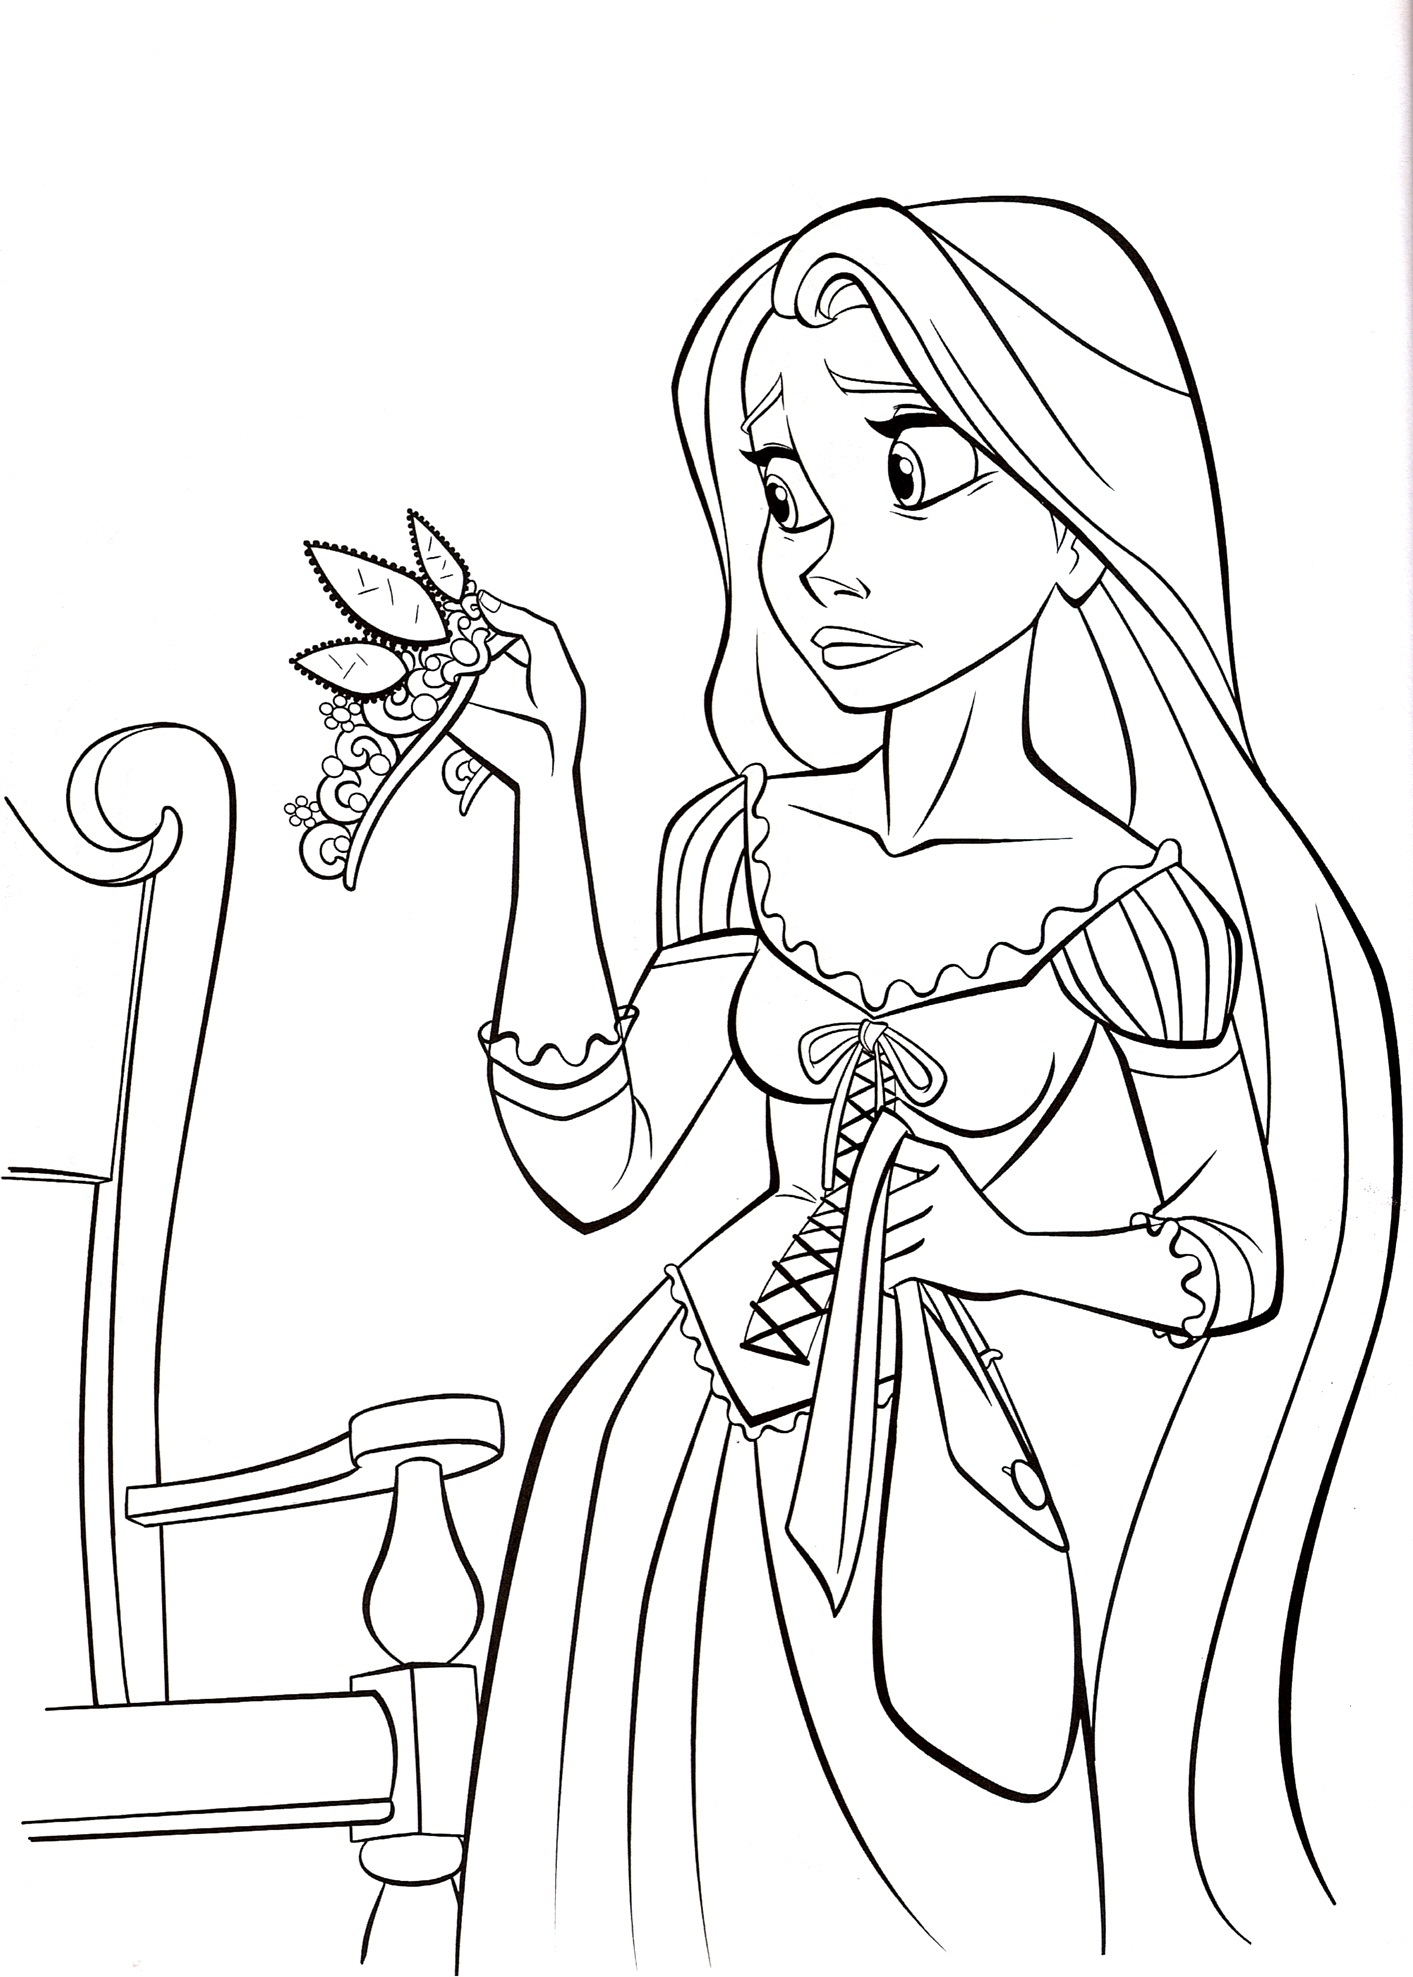  Princess Disney Coloring Pages for kids | Disney coloring pages |